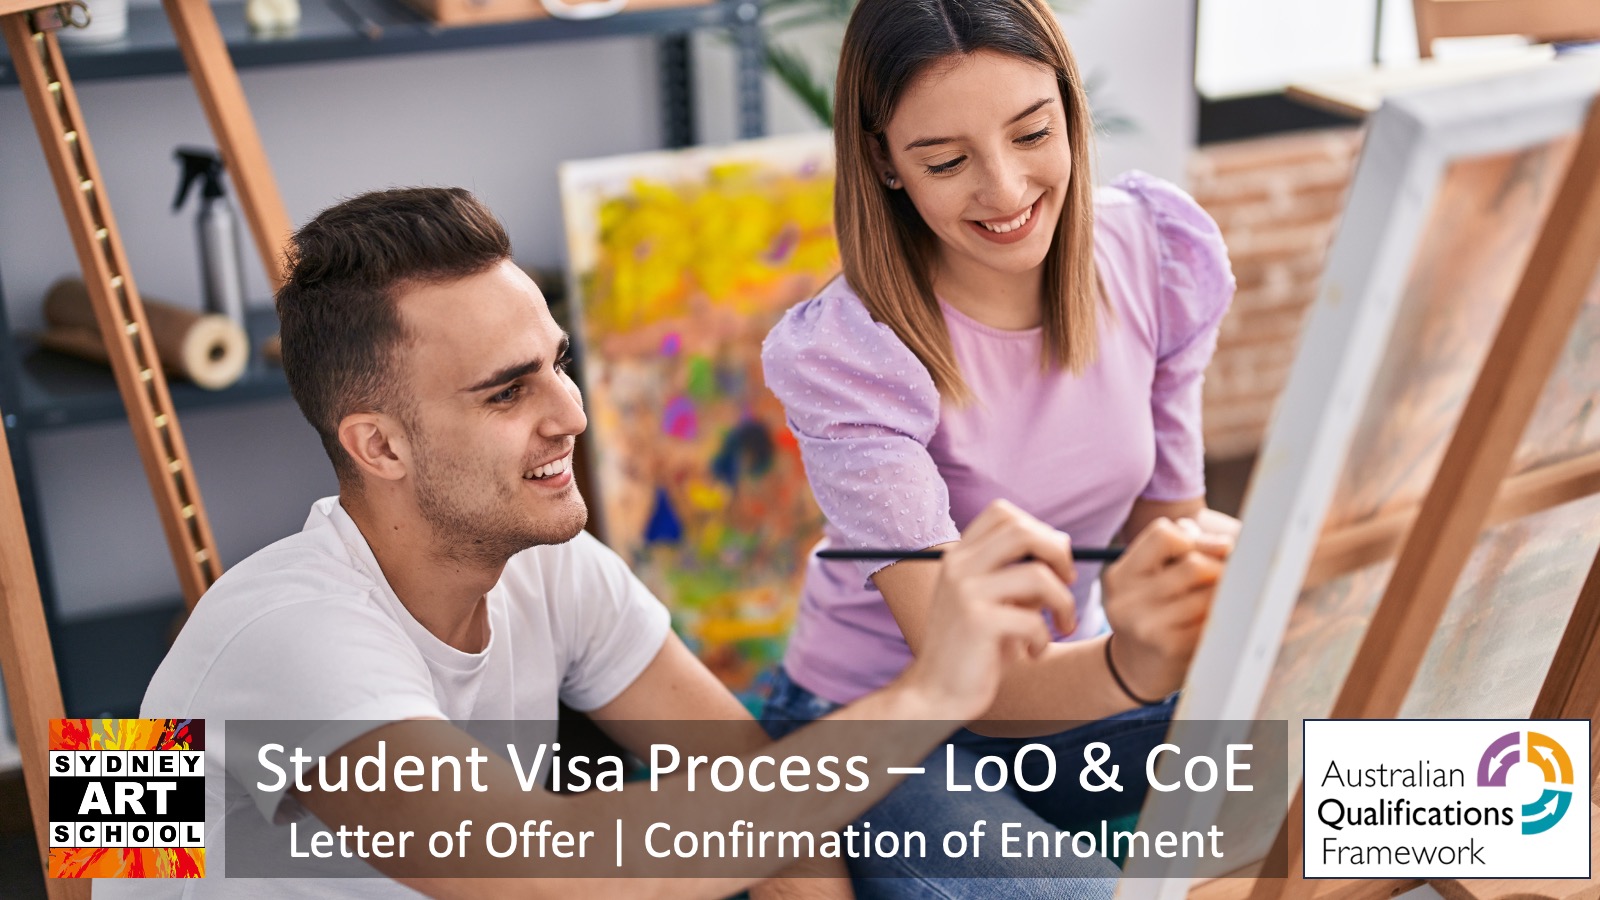 How to get a CoE (Confirmation of Enrolment) and LoO (Letter of Offer) for your Student Visa